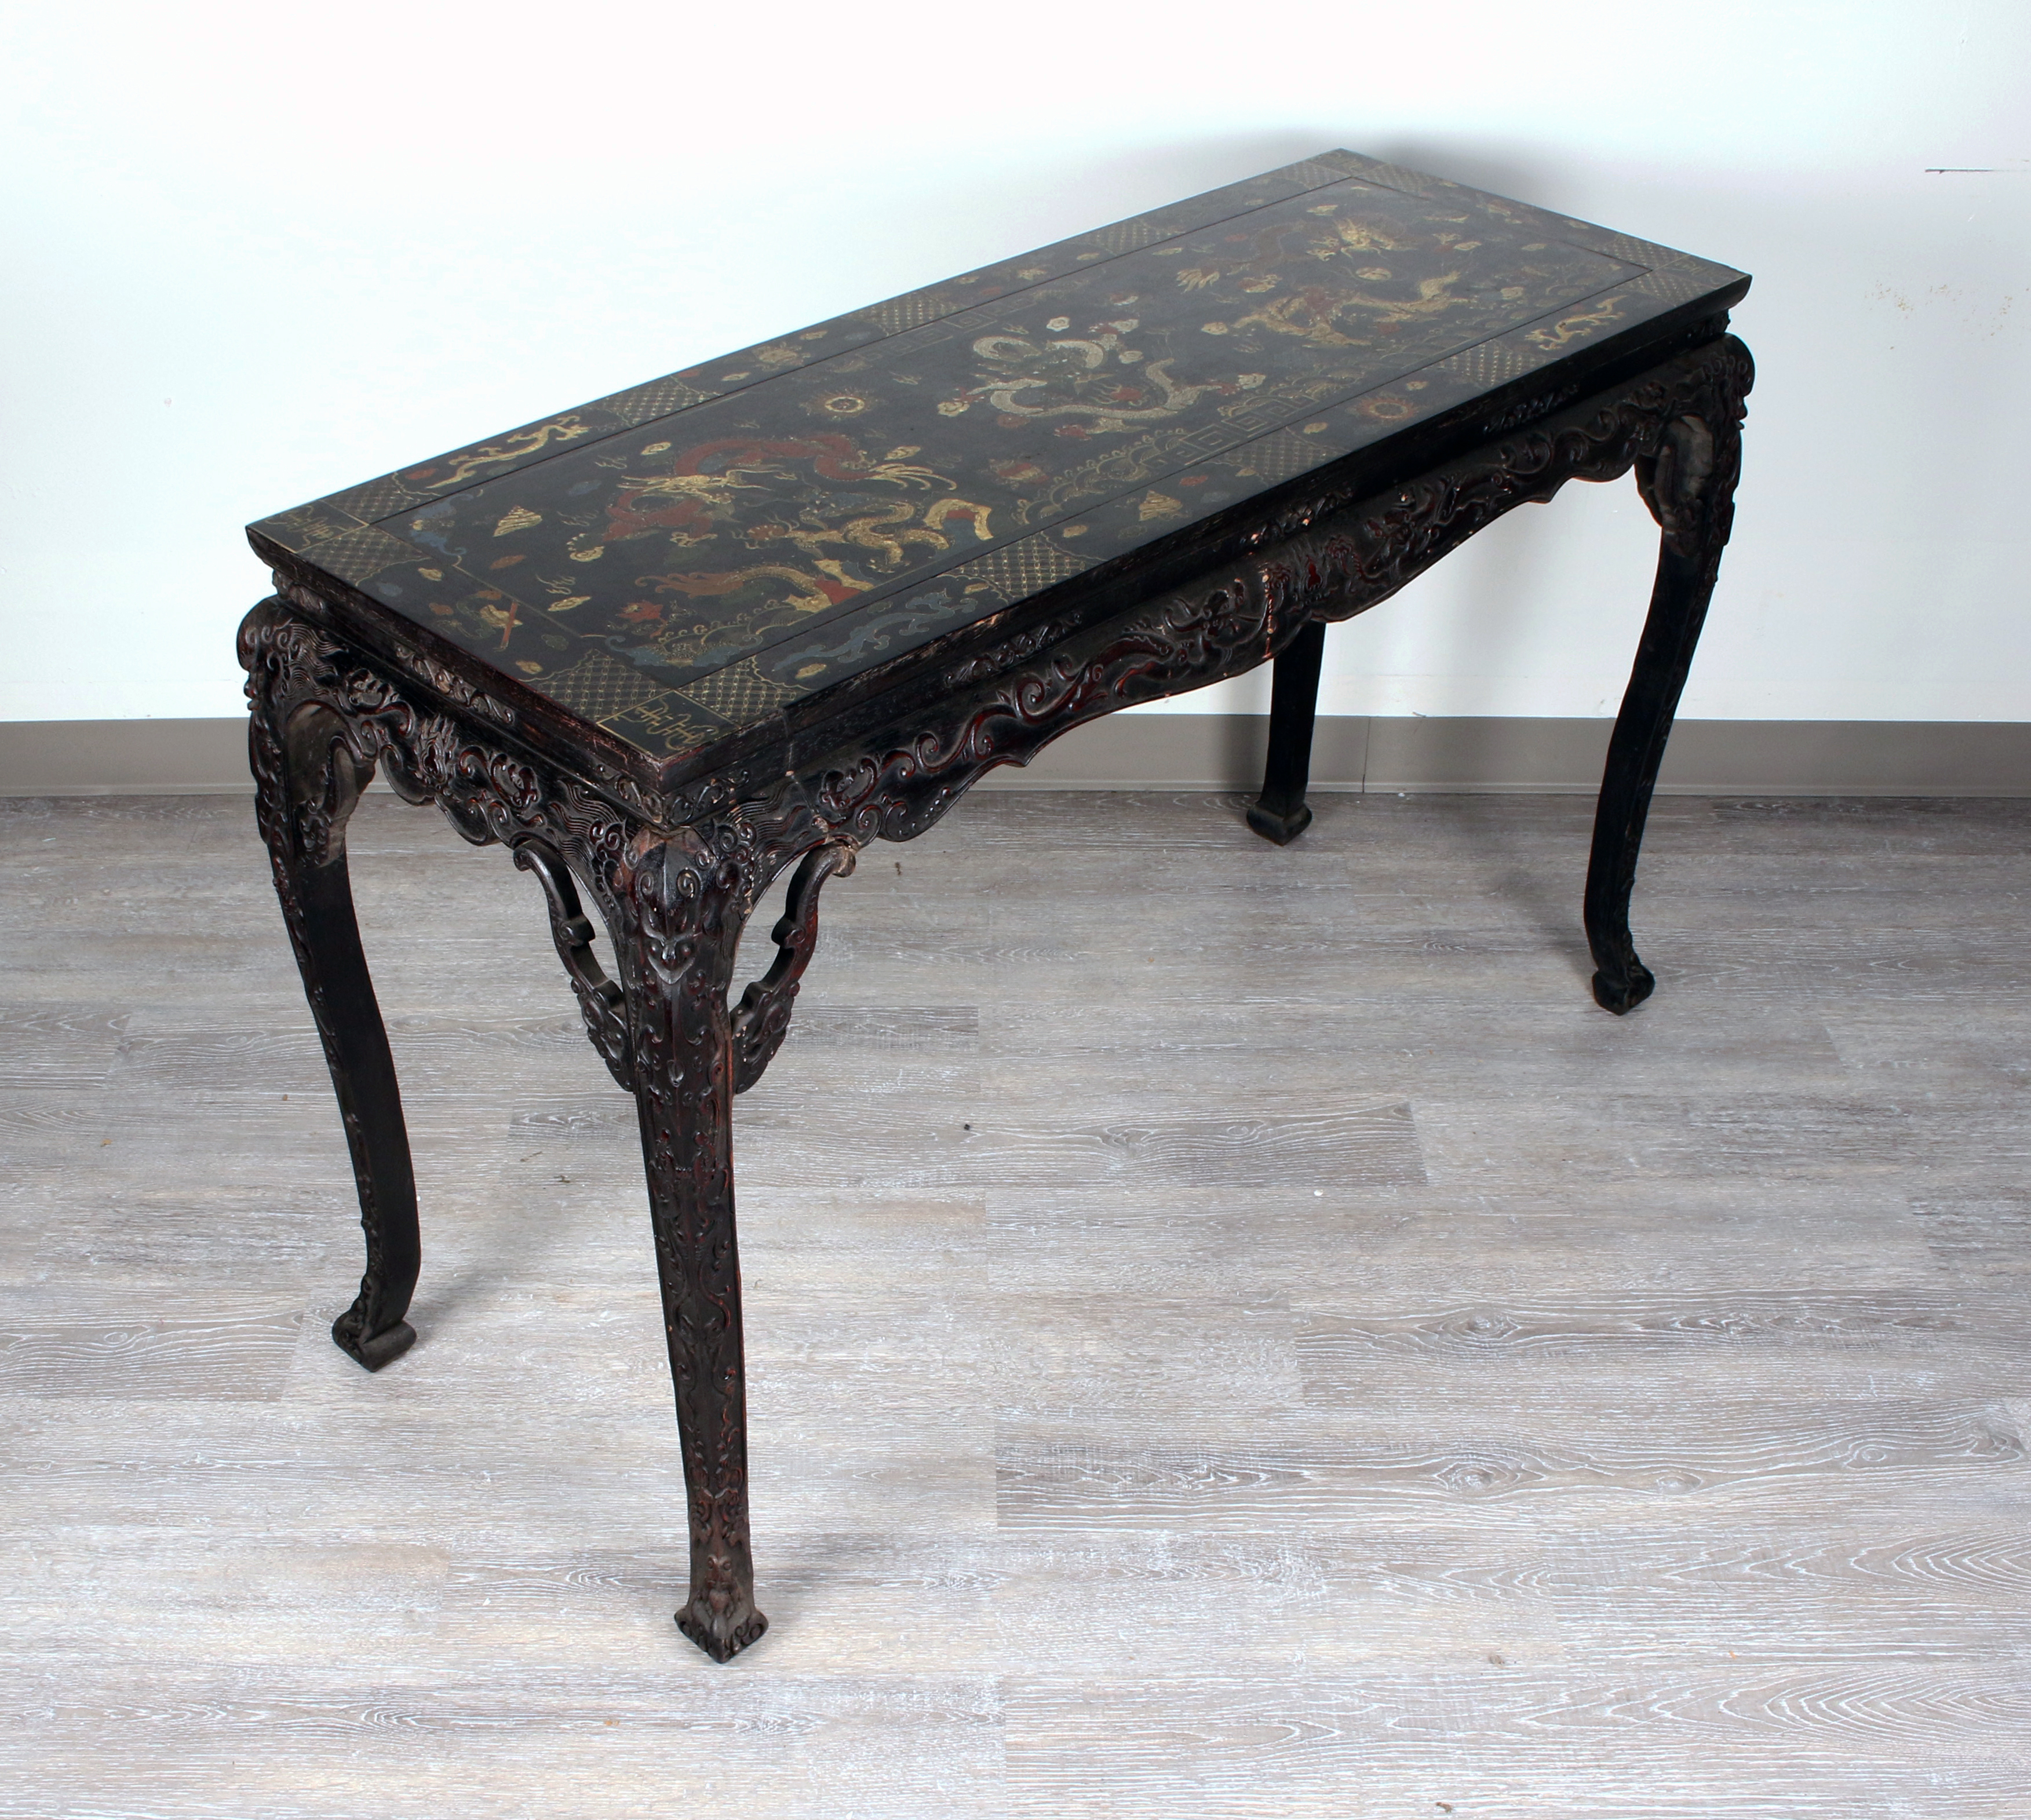 Vibrant Chinese Lacquer Table With Dragon Painting & Scholar Motifs image 7